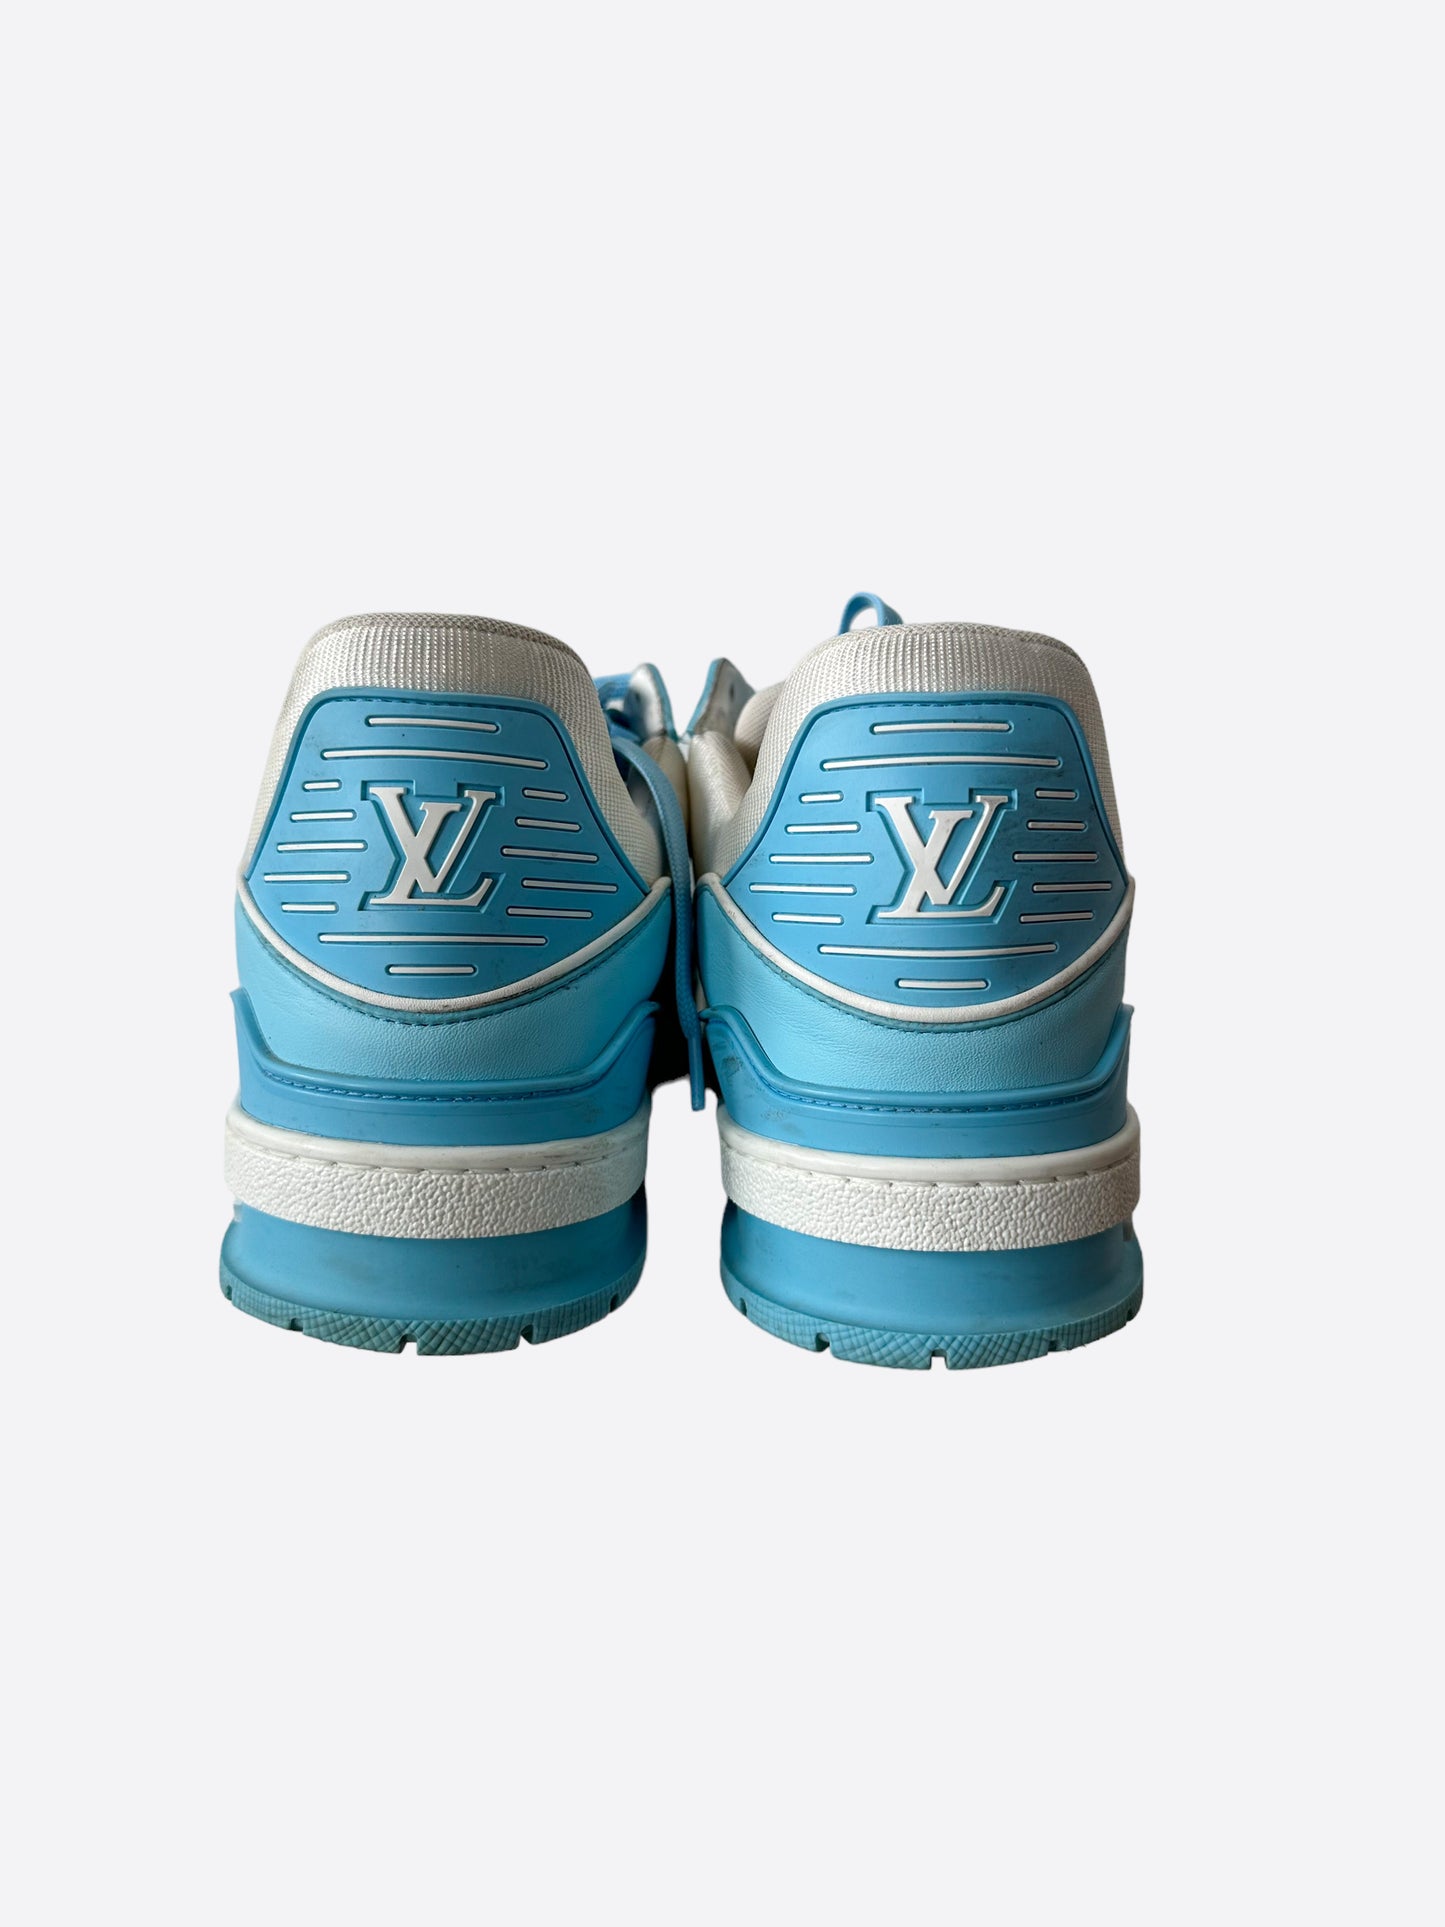 LV Trainers White Blue